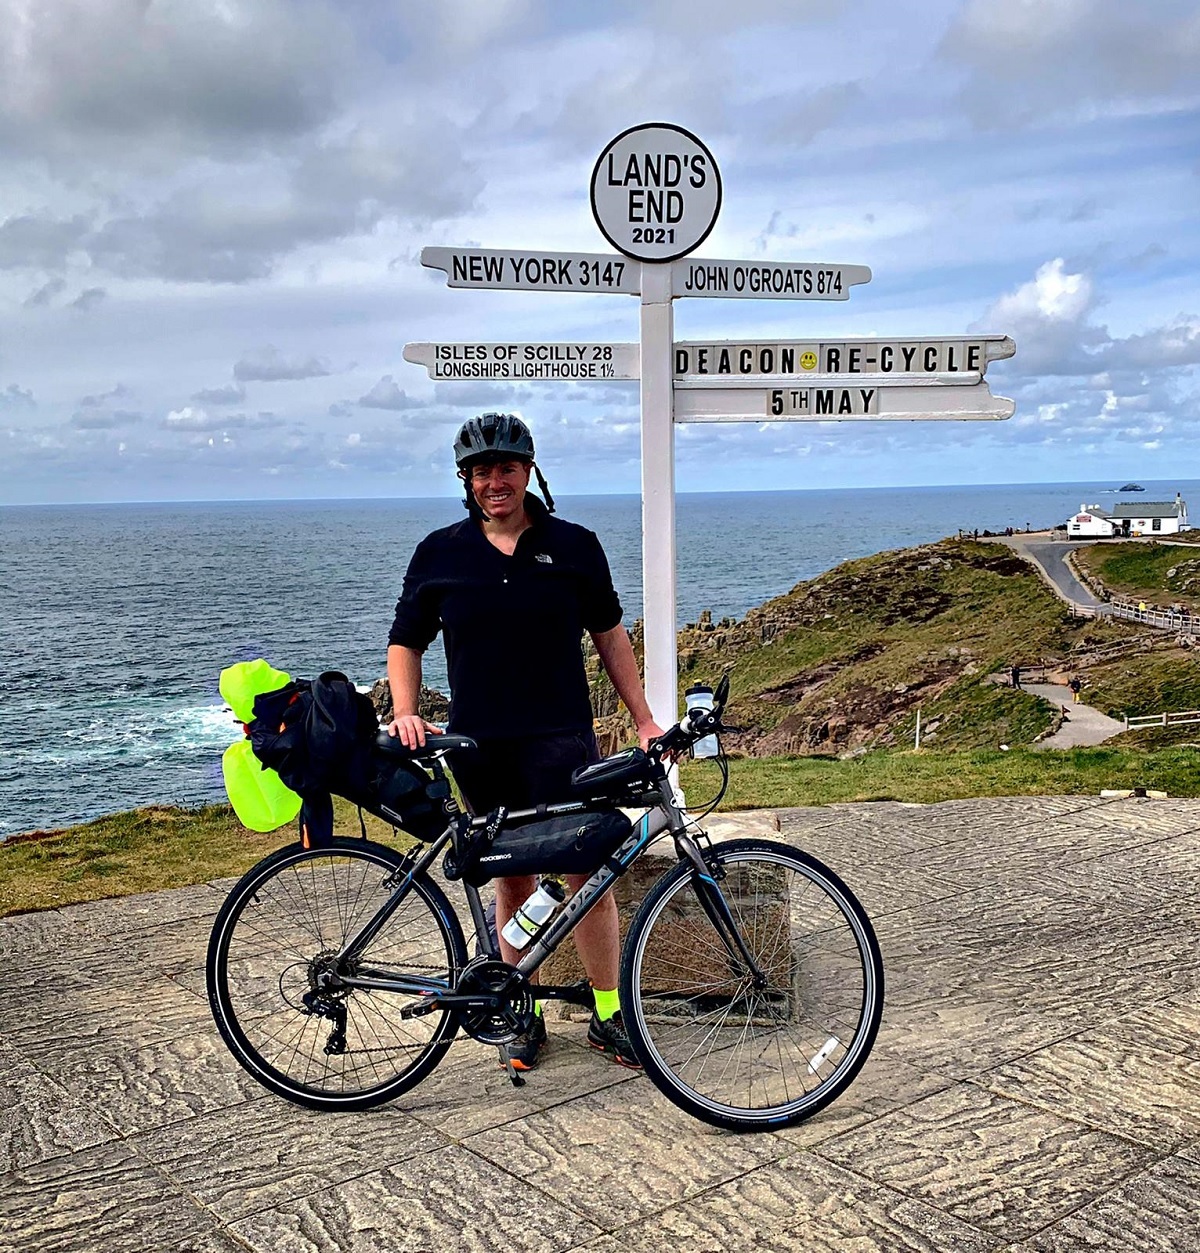 Here goes nothing - Deacon Richardson at the start of his epic ride, in Lands End